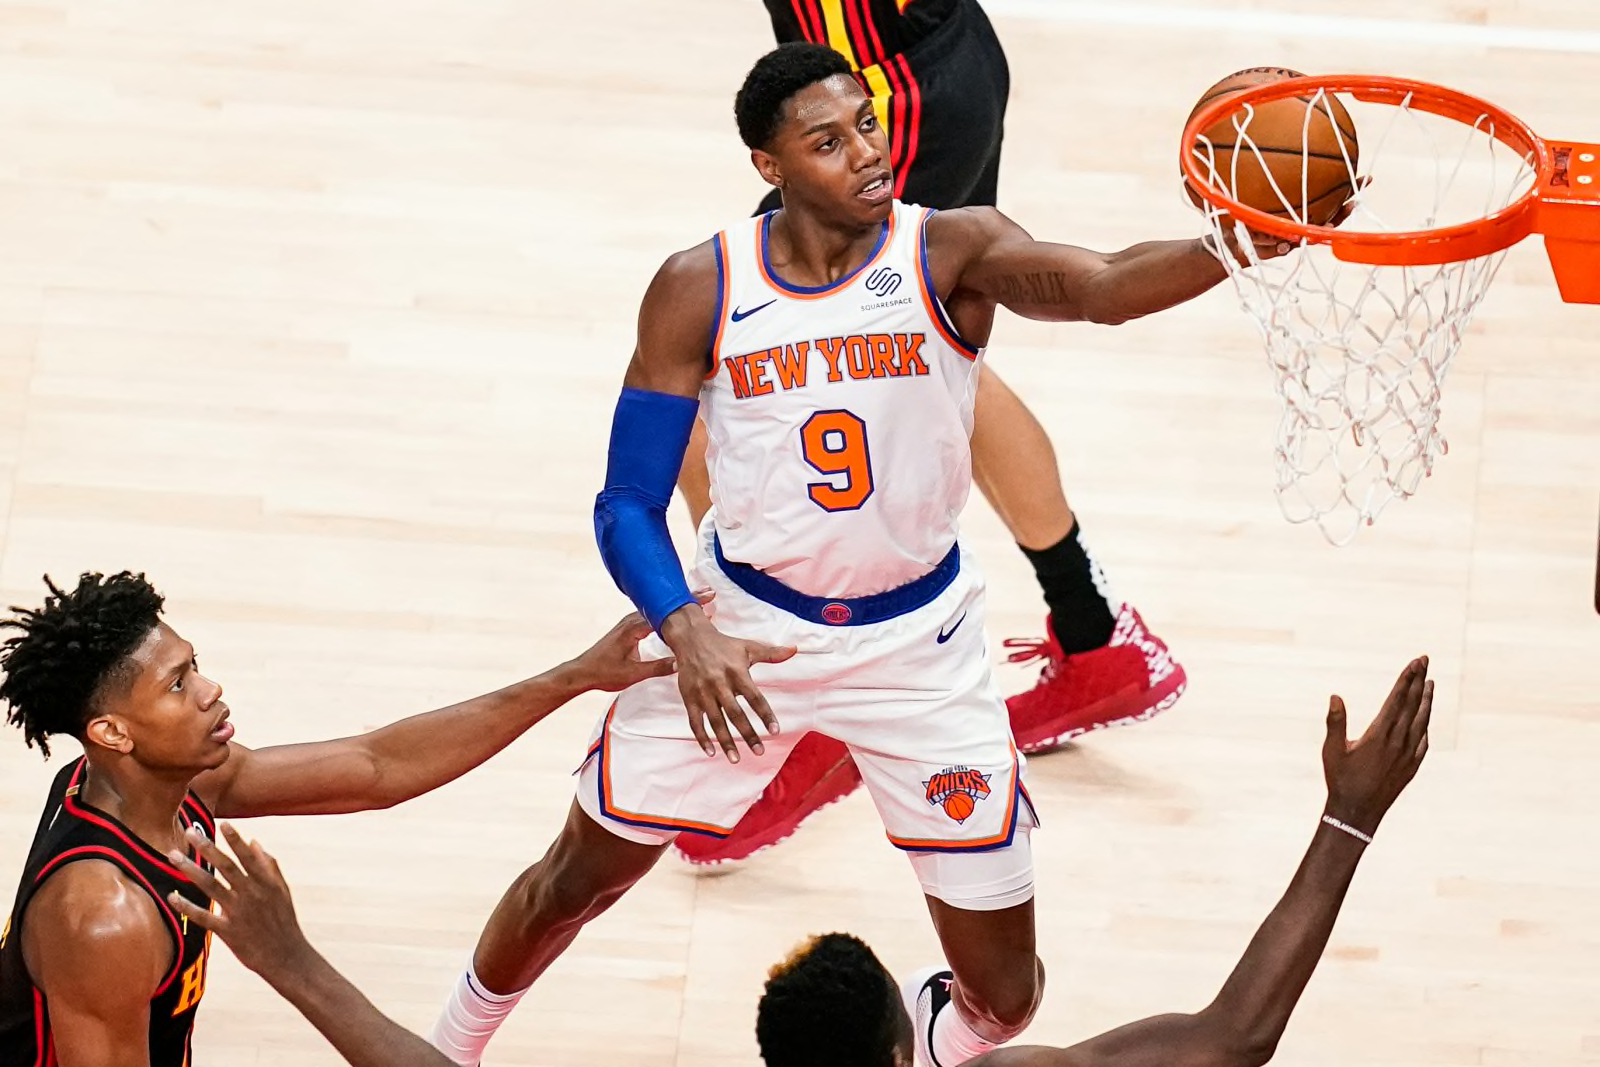 New York Knicks: Ranking The Best Shooters On The Roster, 42% OFF